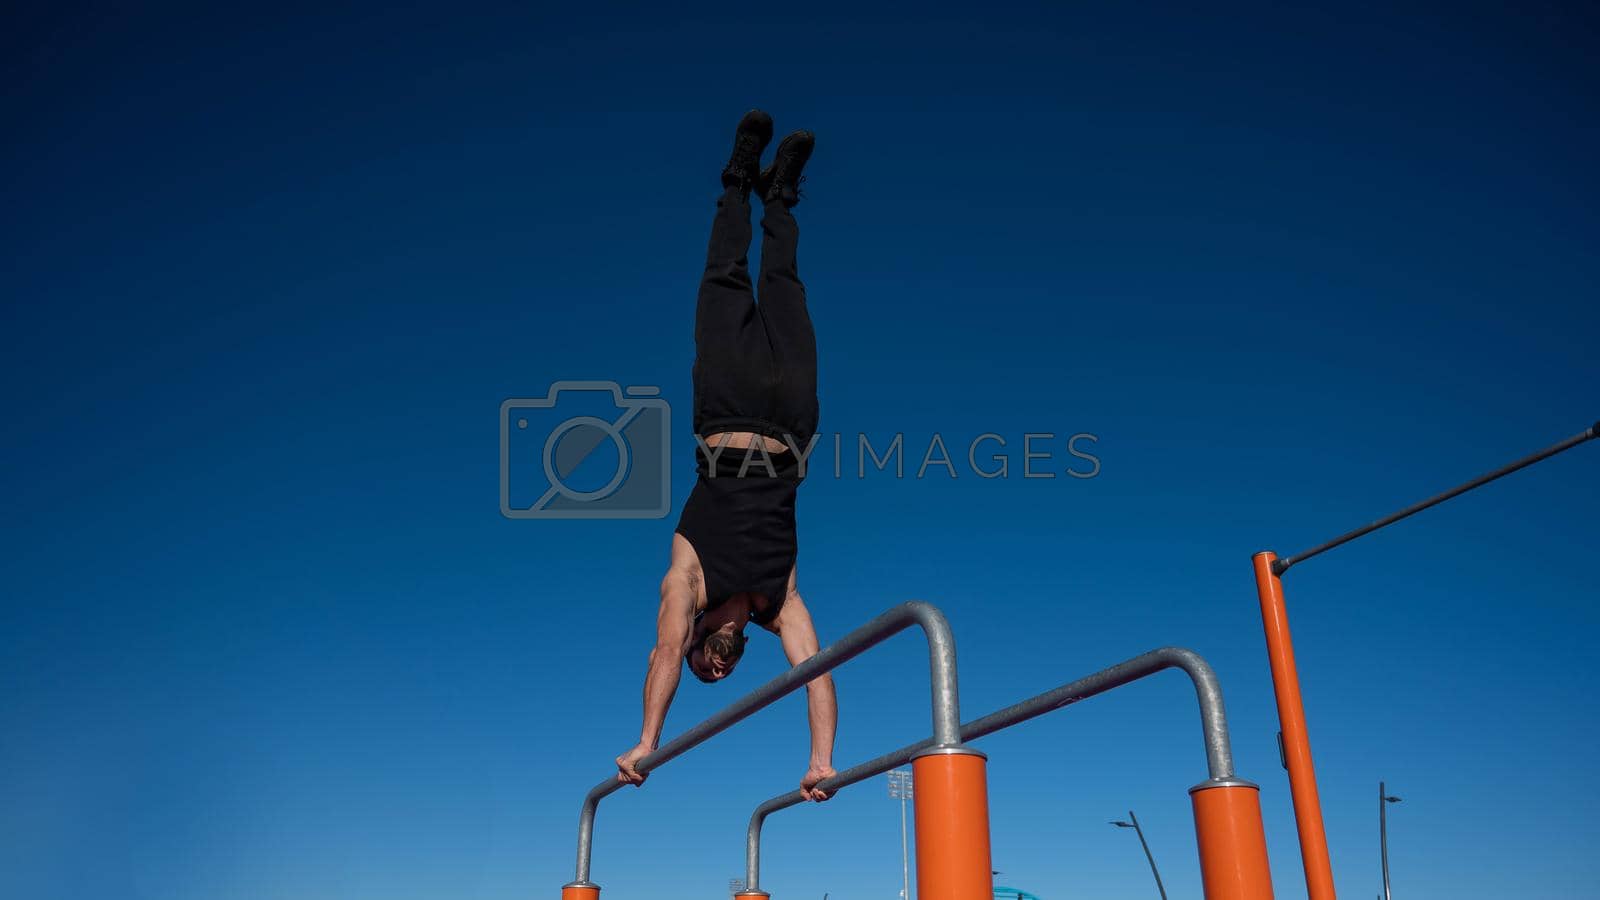 Royalty free image of Shirtless man doing handstand on parallel bars at sports ground. by mrwed54